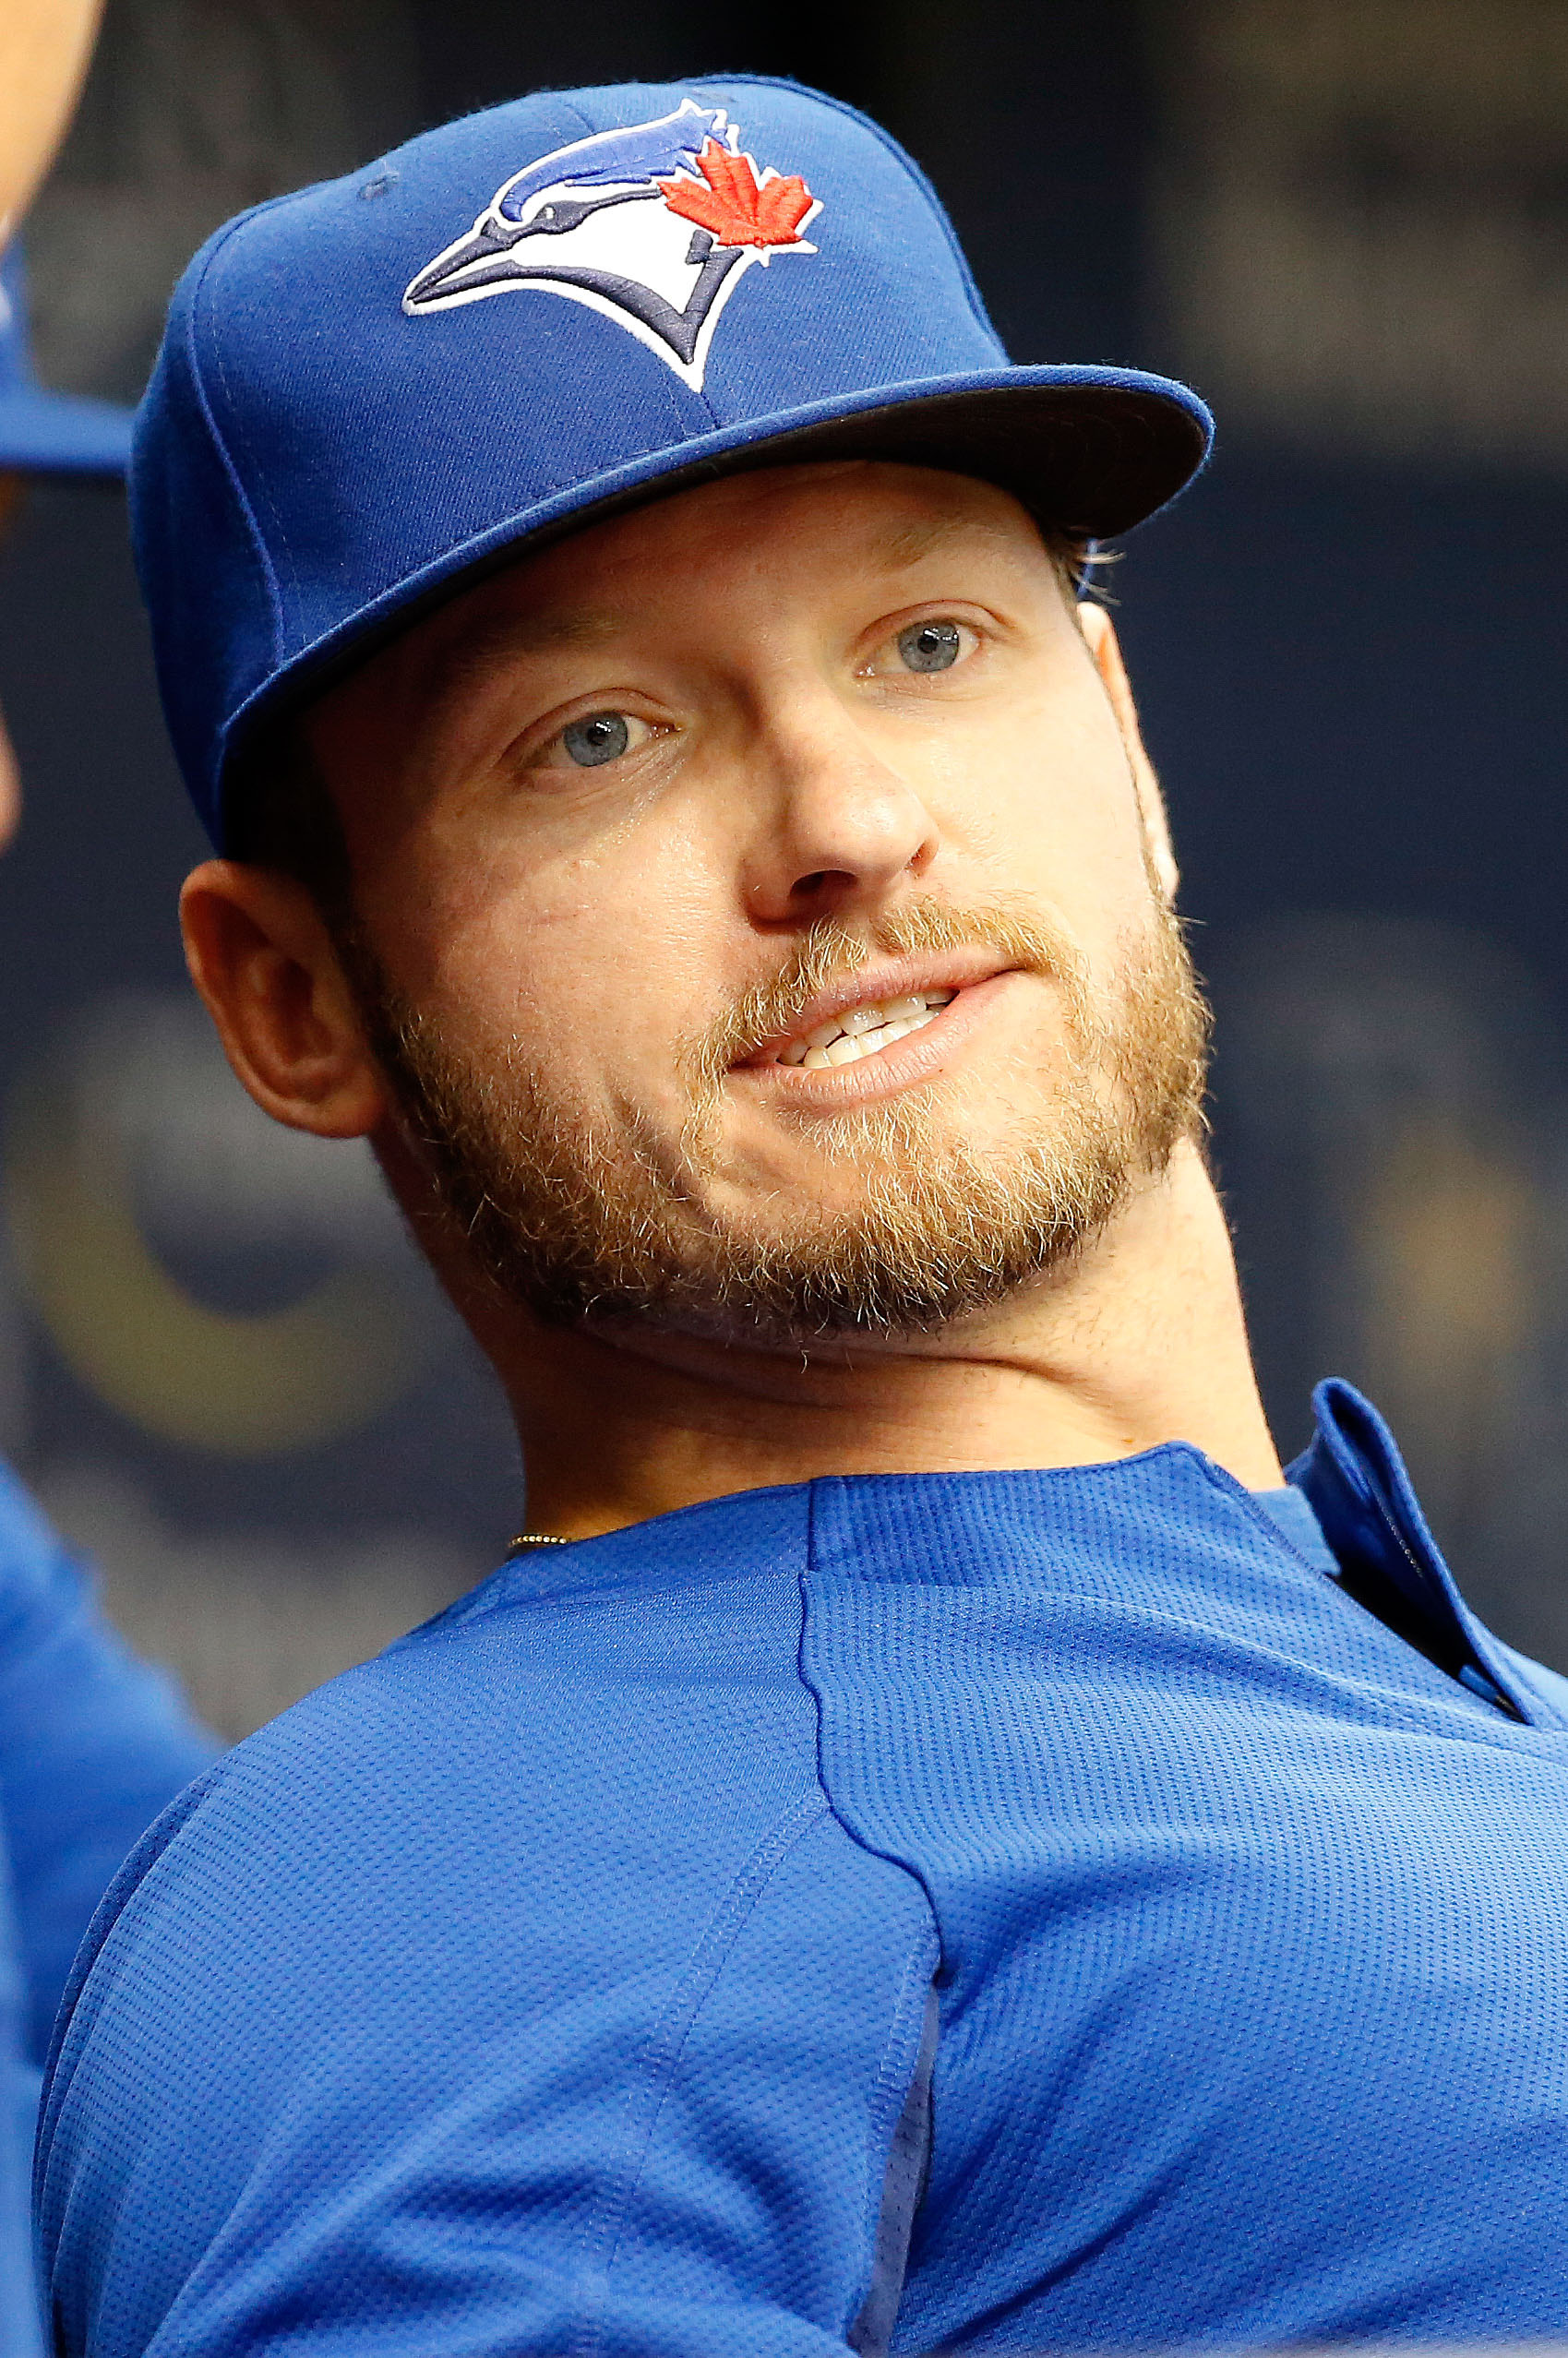 Career over? Yankees cut ties with former Blue Jays star Josh Donaldson